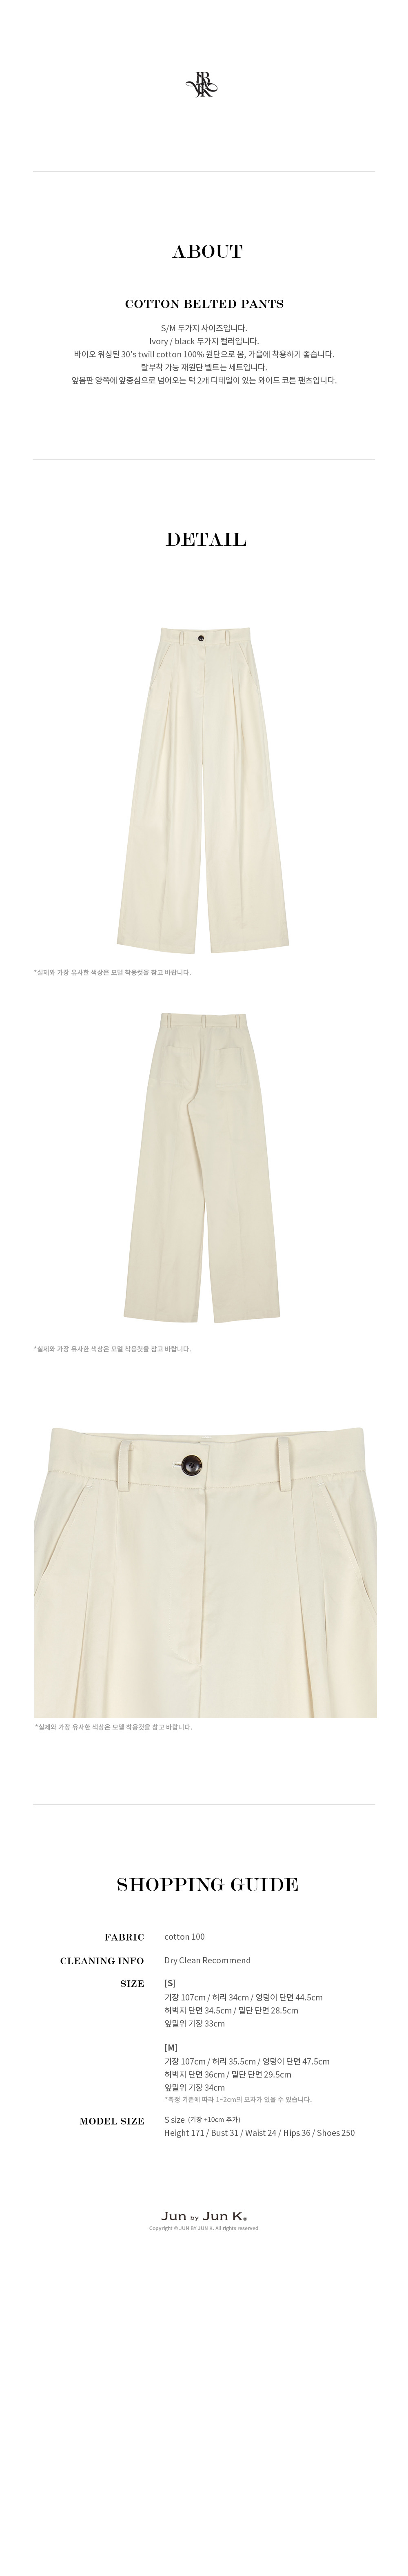 cotton%20belted%20pants_ivory04.jpg